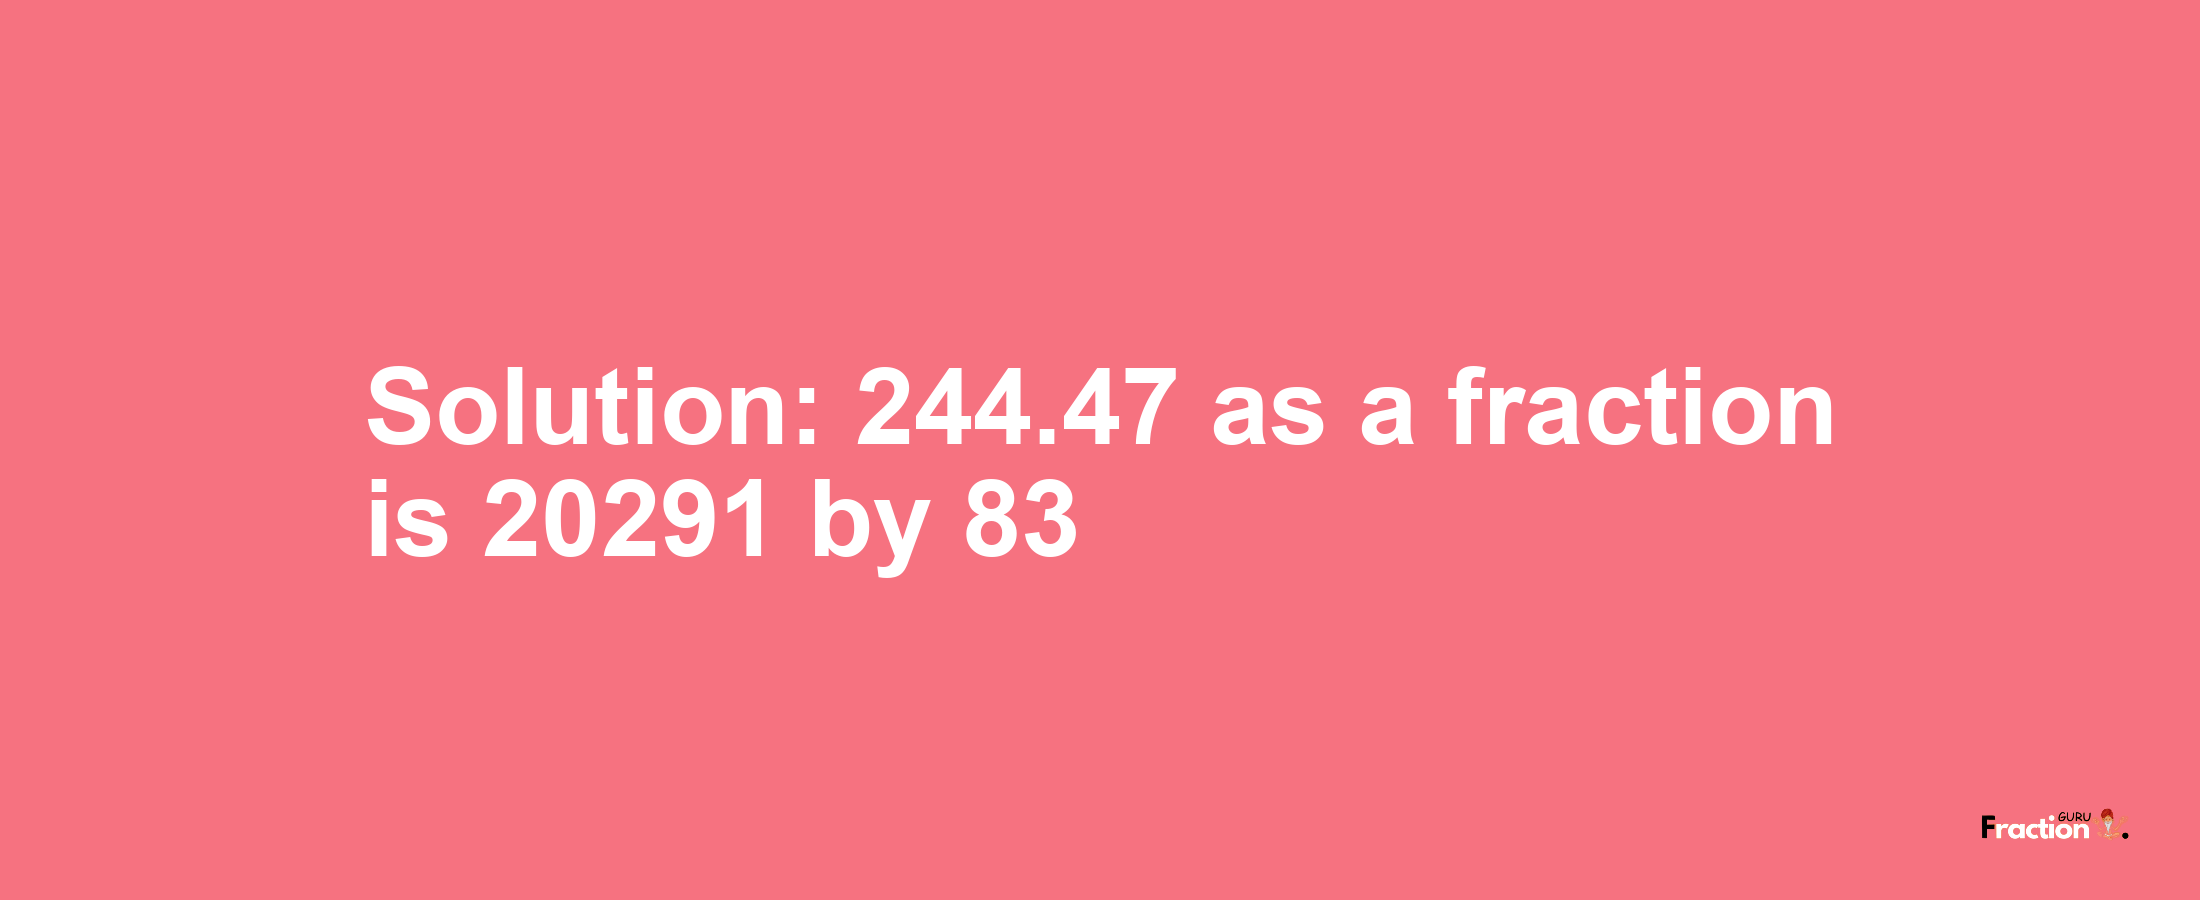 Solution:244.47 as a fraction is 20291/83